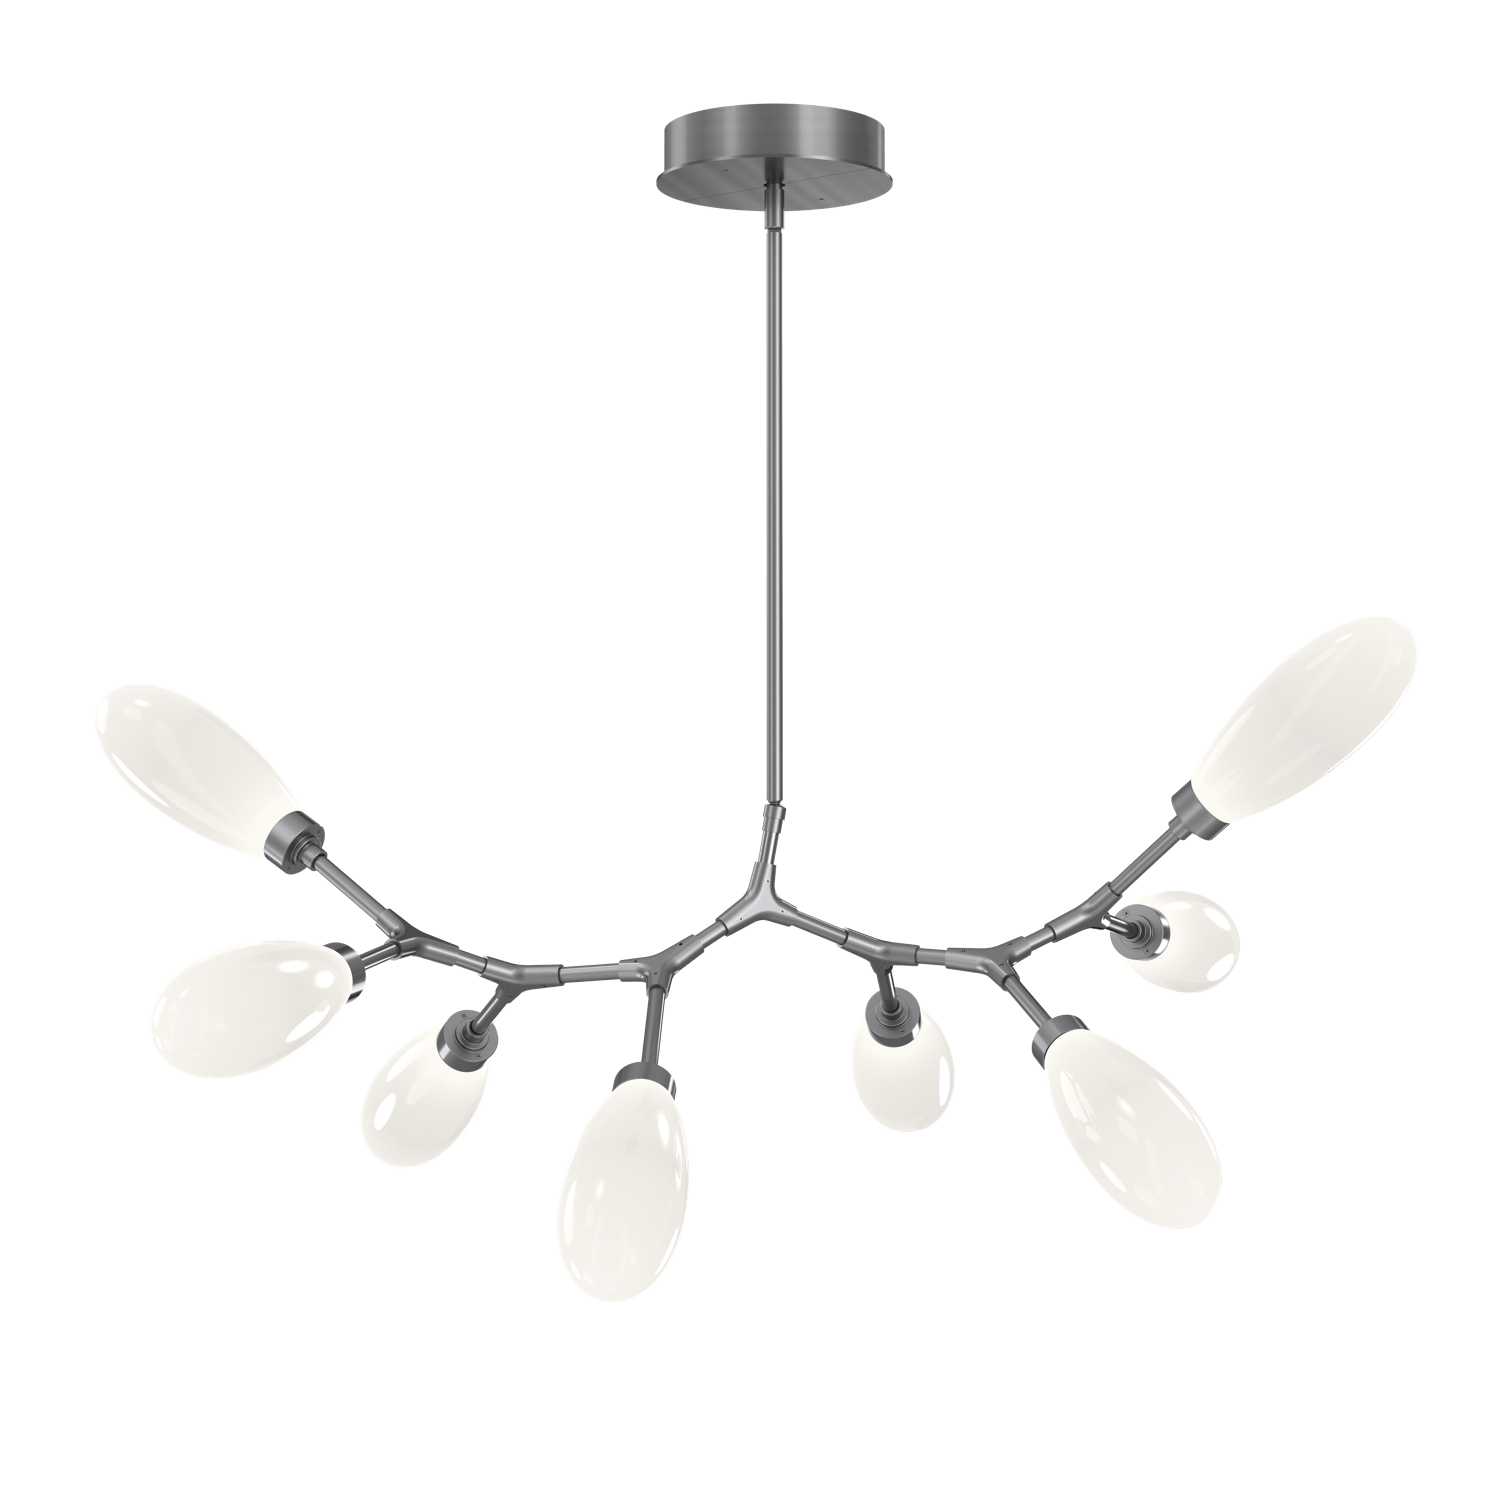 PLB0071-BB-GM-WL-LL-Hammerton-Studio-Fiori-8-light-organic-branch-chandelier-with-gunmetal-finish-and-opal-white-glass-shades-and-LED-lamping